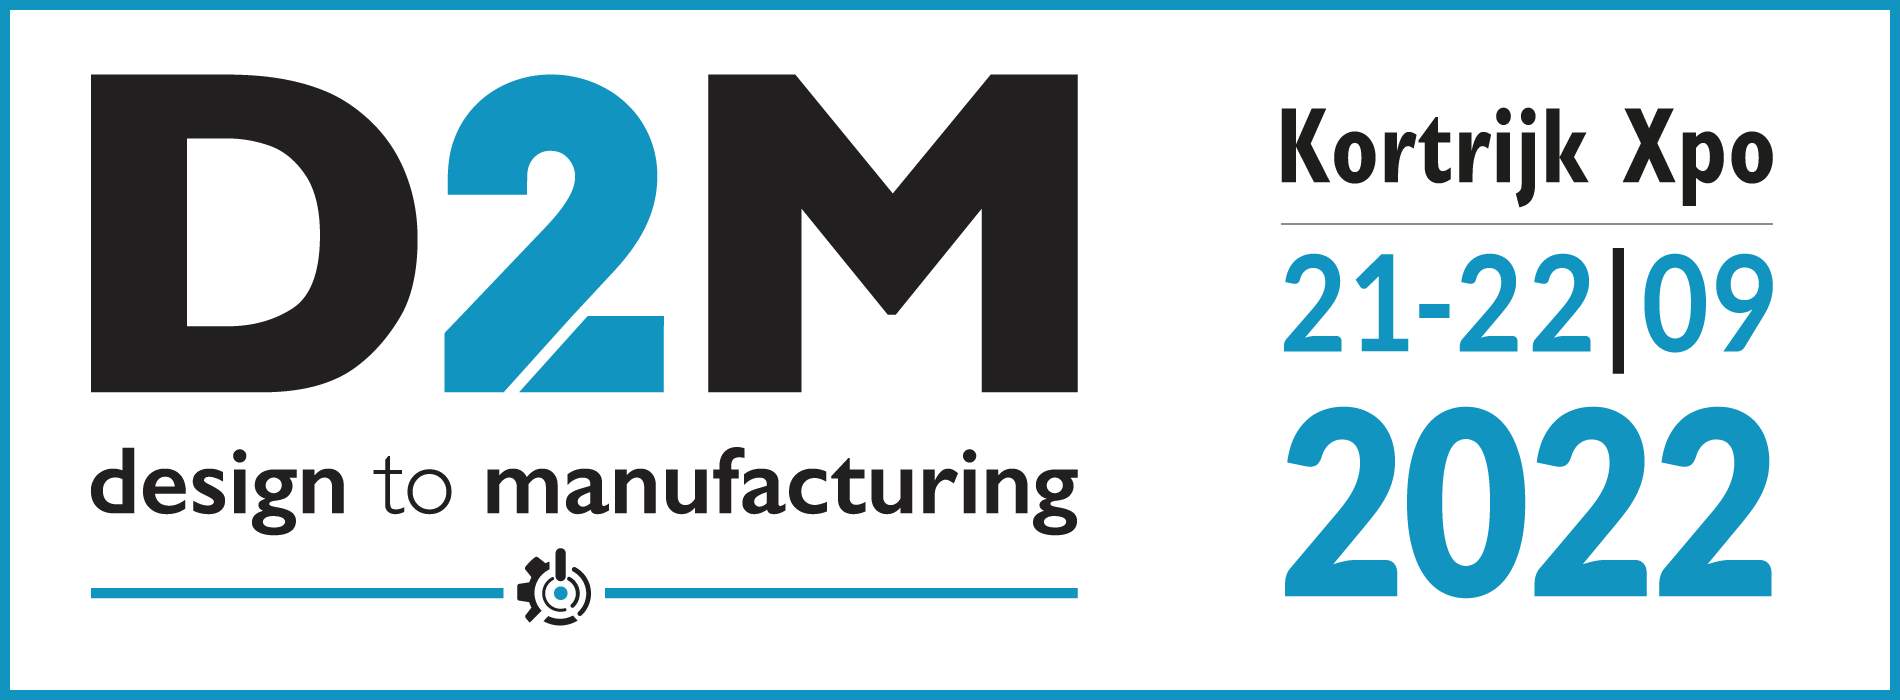 Logo of Design to Manufacturing (D2M) event 2022 in Kortrijk